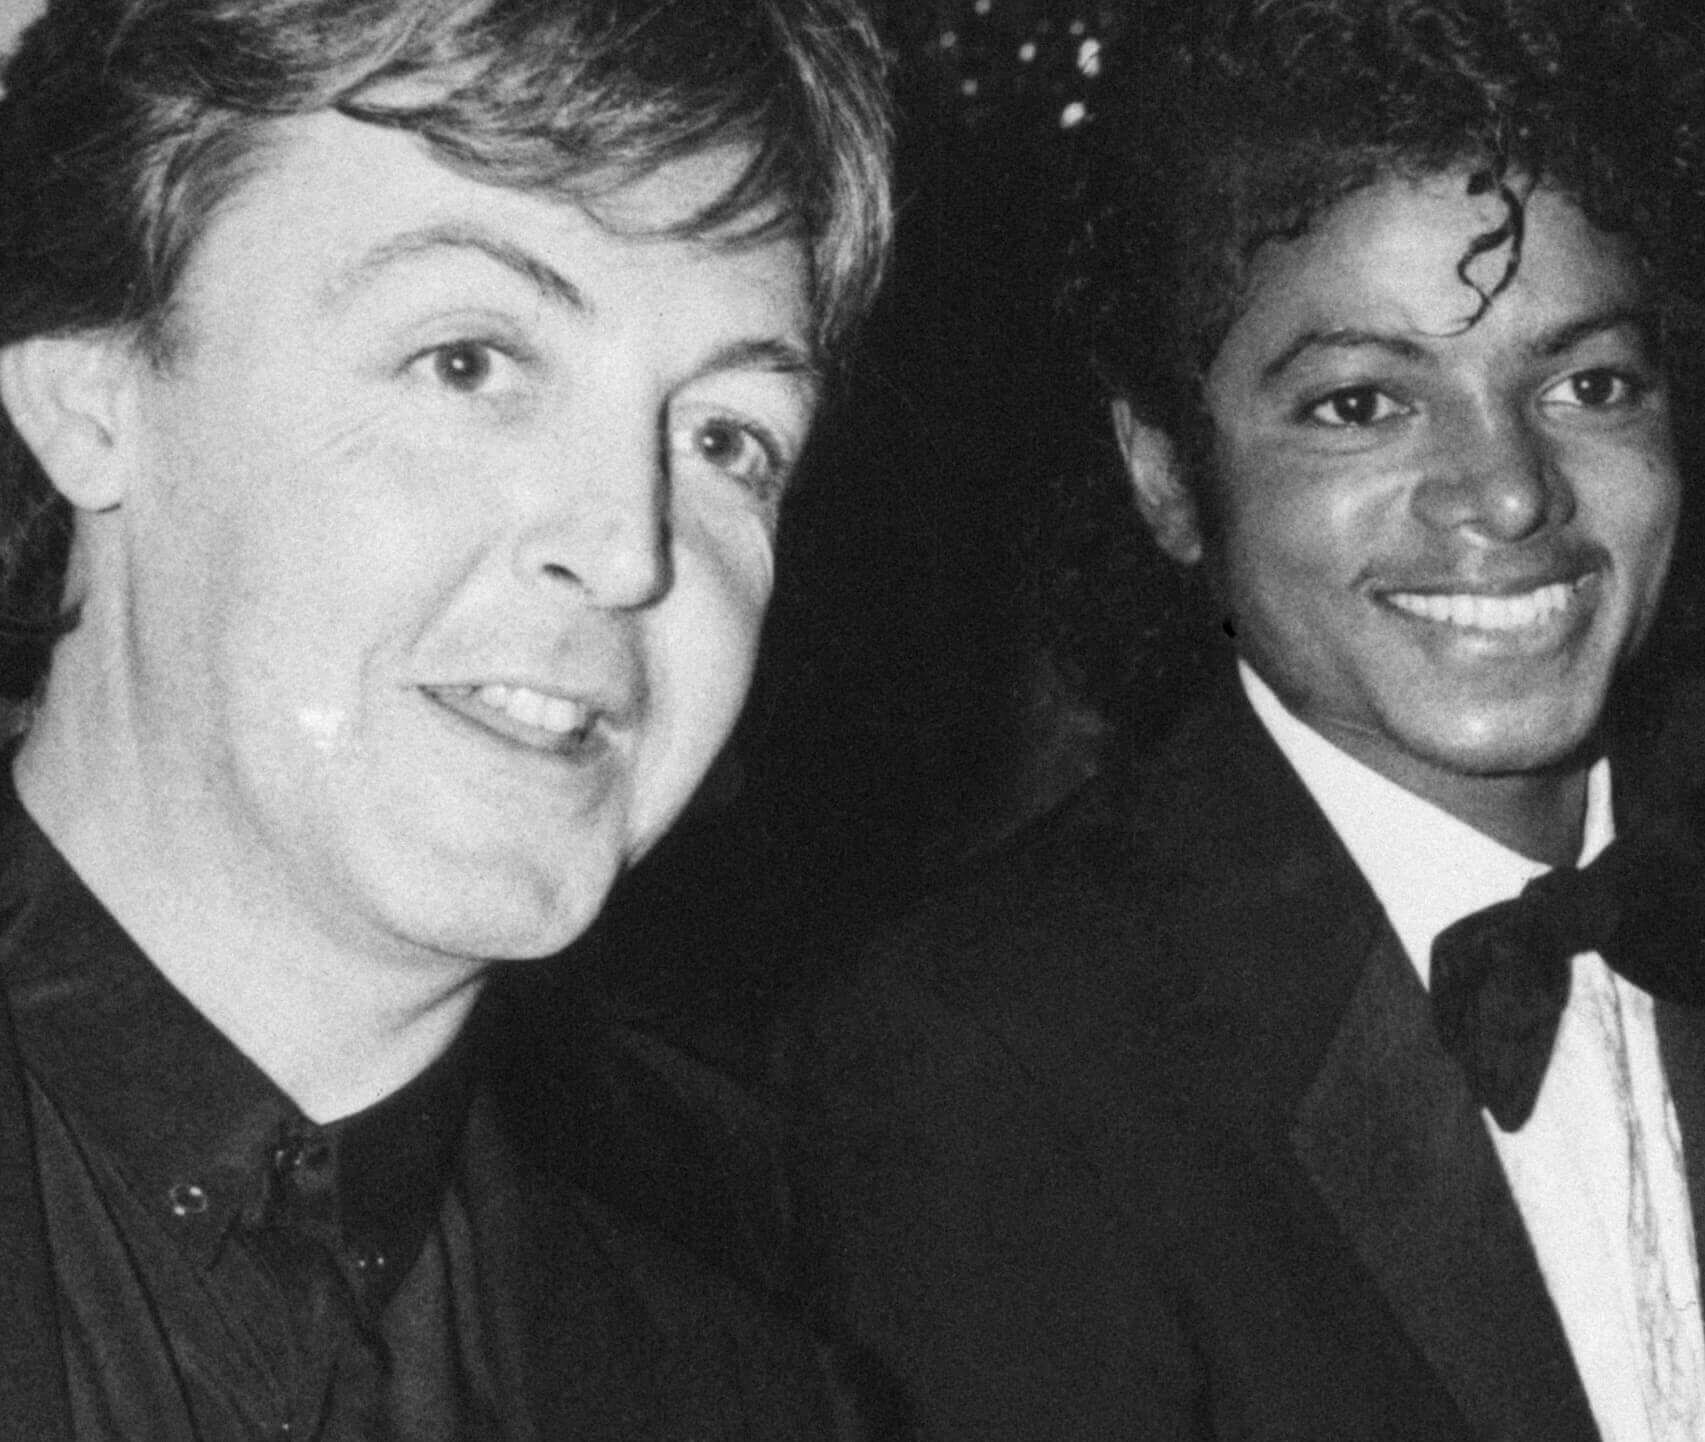 The Beatles' Paul McCartney and Michael Jackson in black-and-white